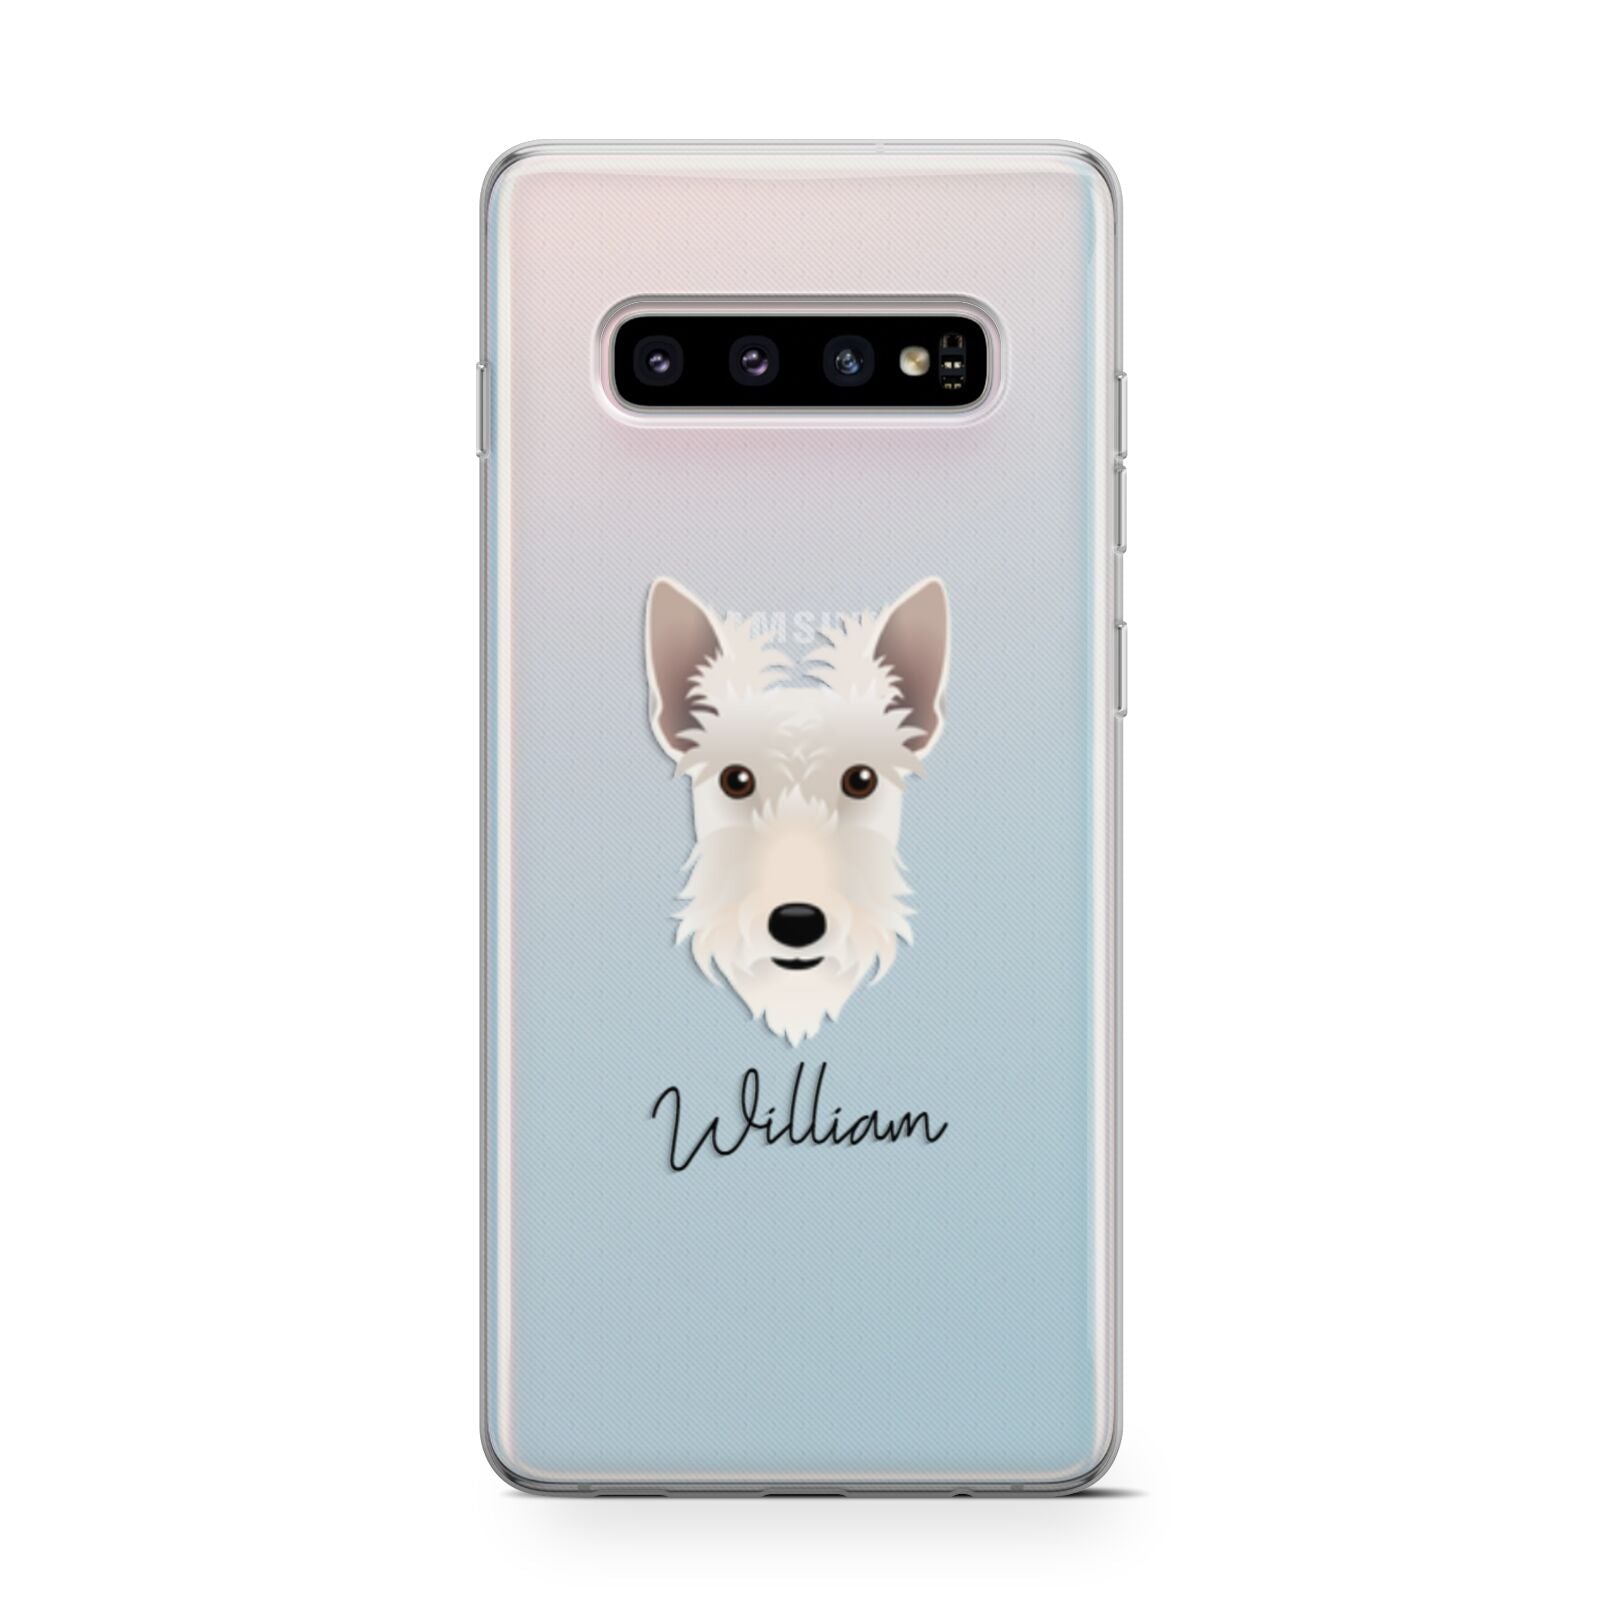 Scottish Terrier Personalised Samsung Galaxy S10 Case